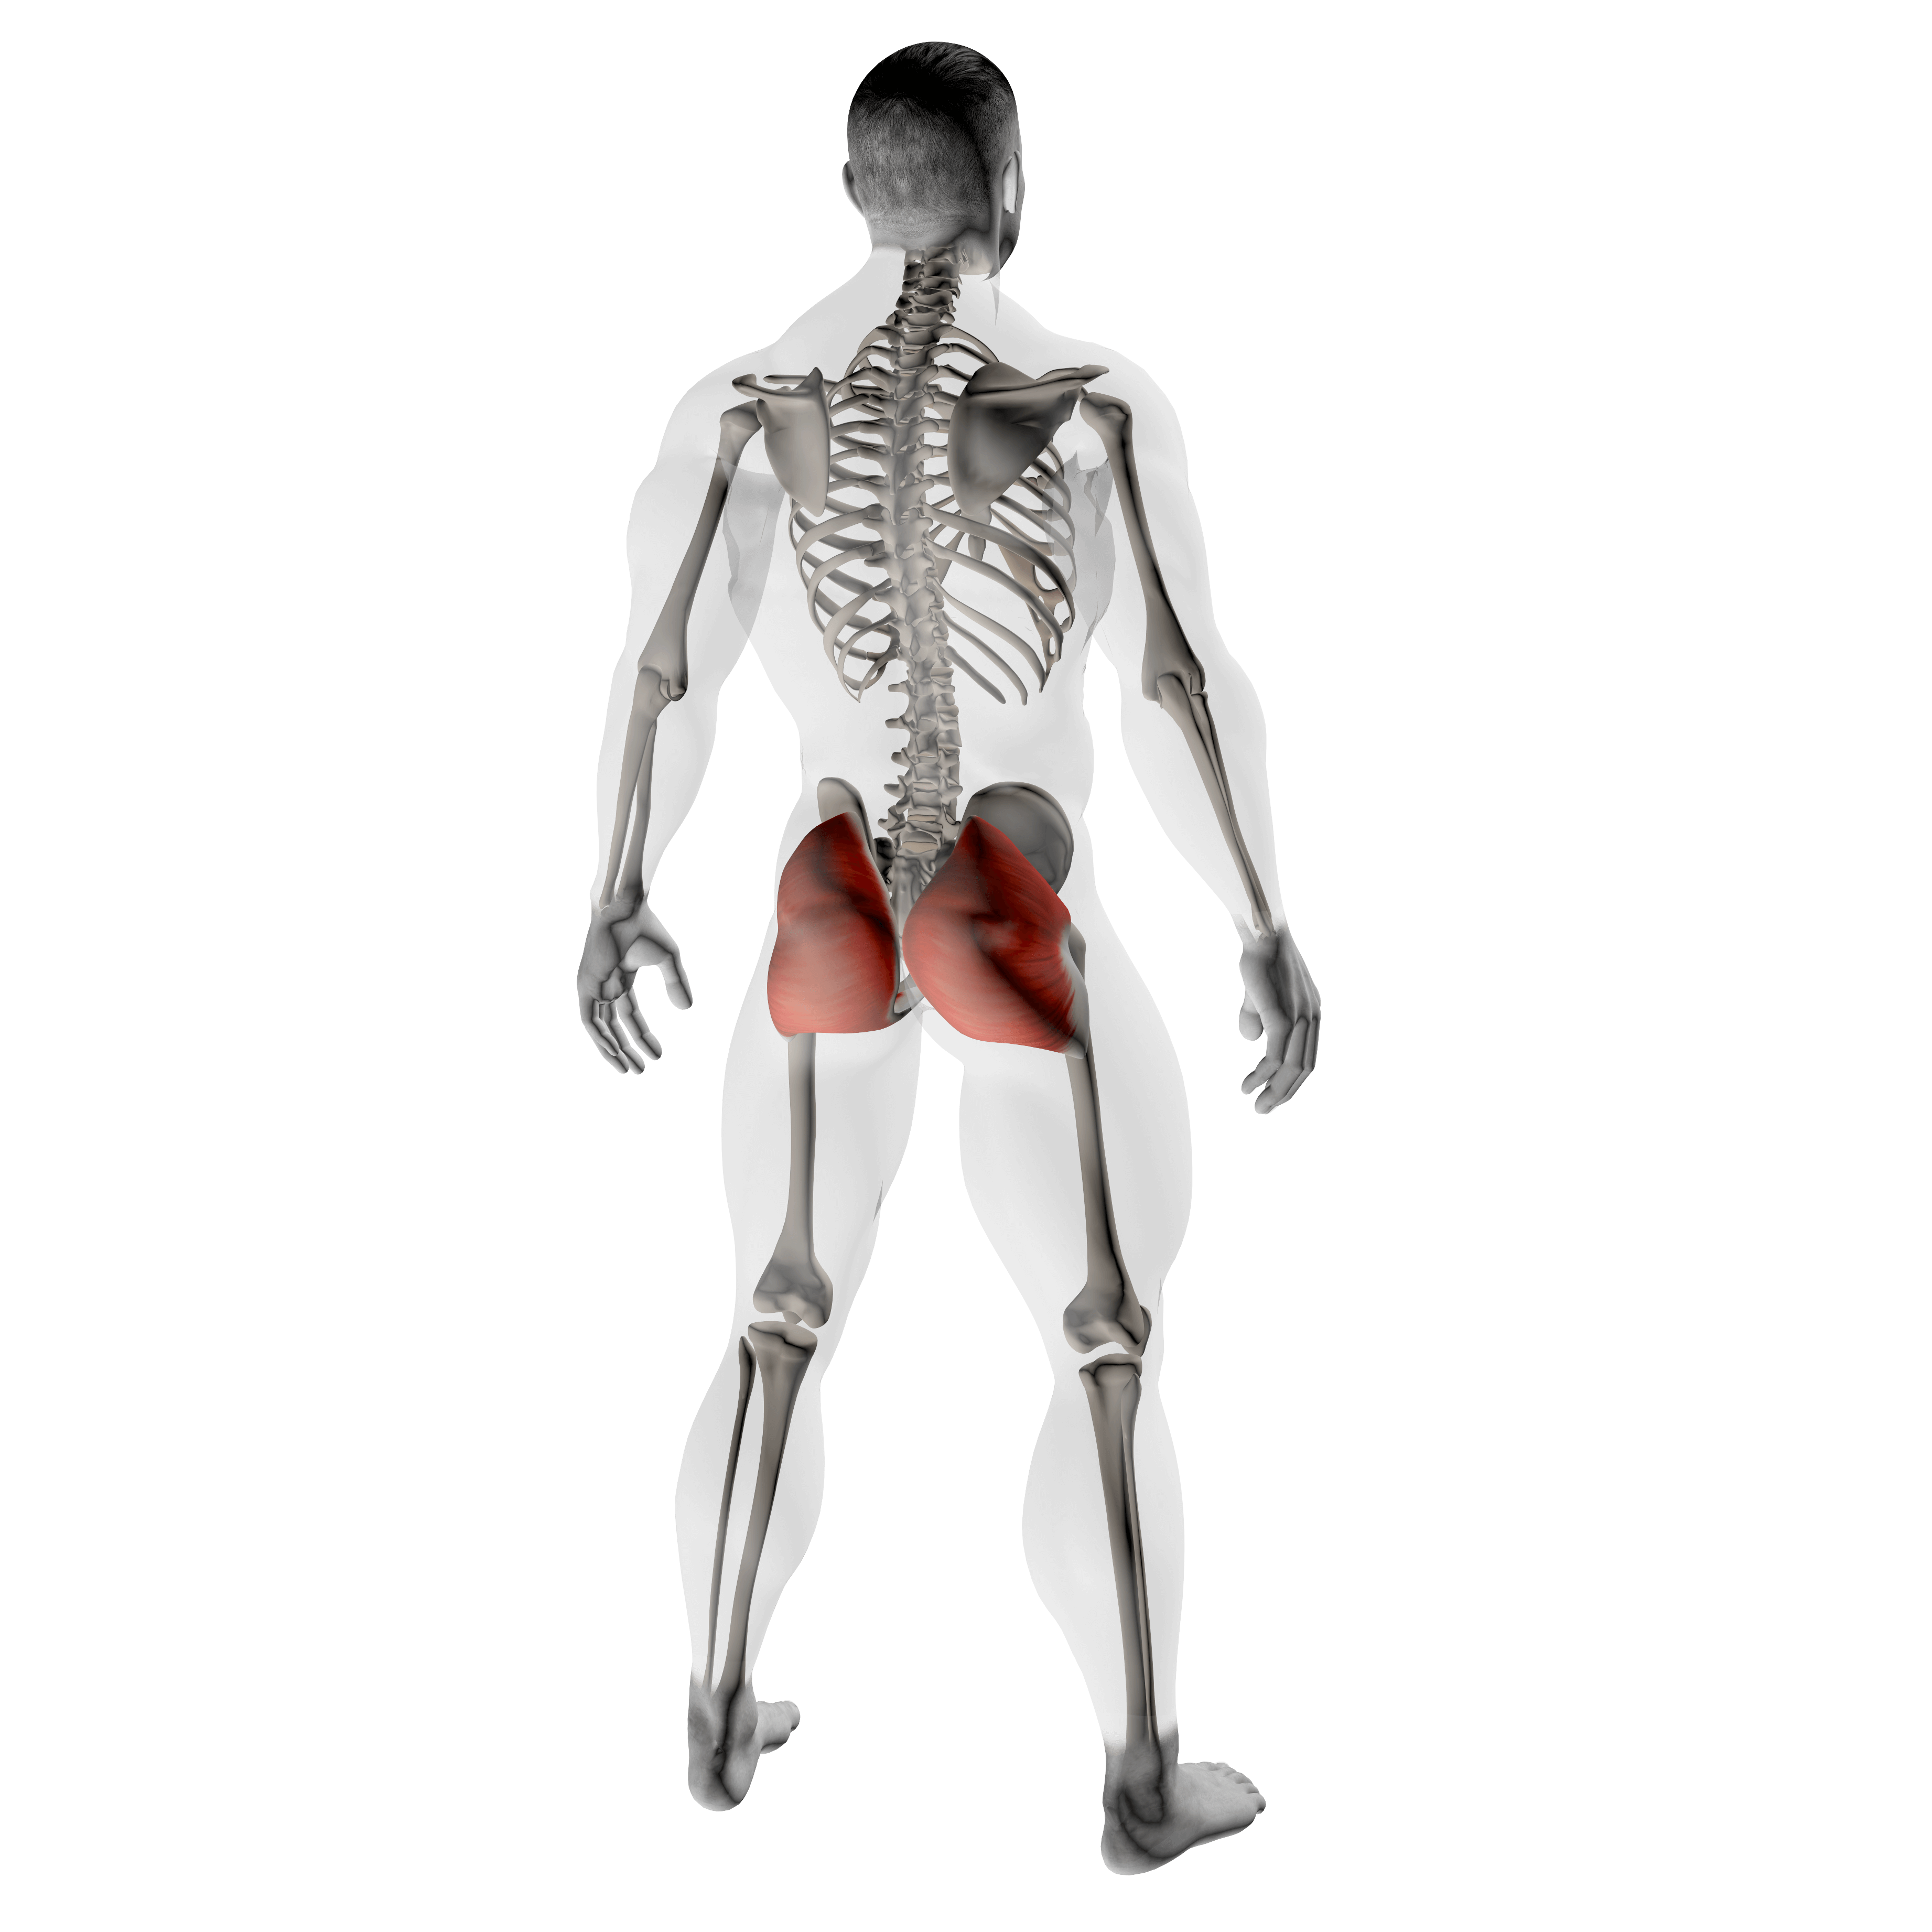 x-ray illustration showing glutes to demonstrate what muscles squats work 